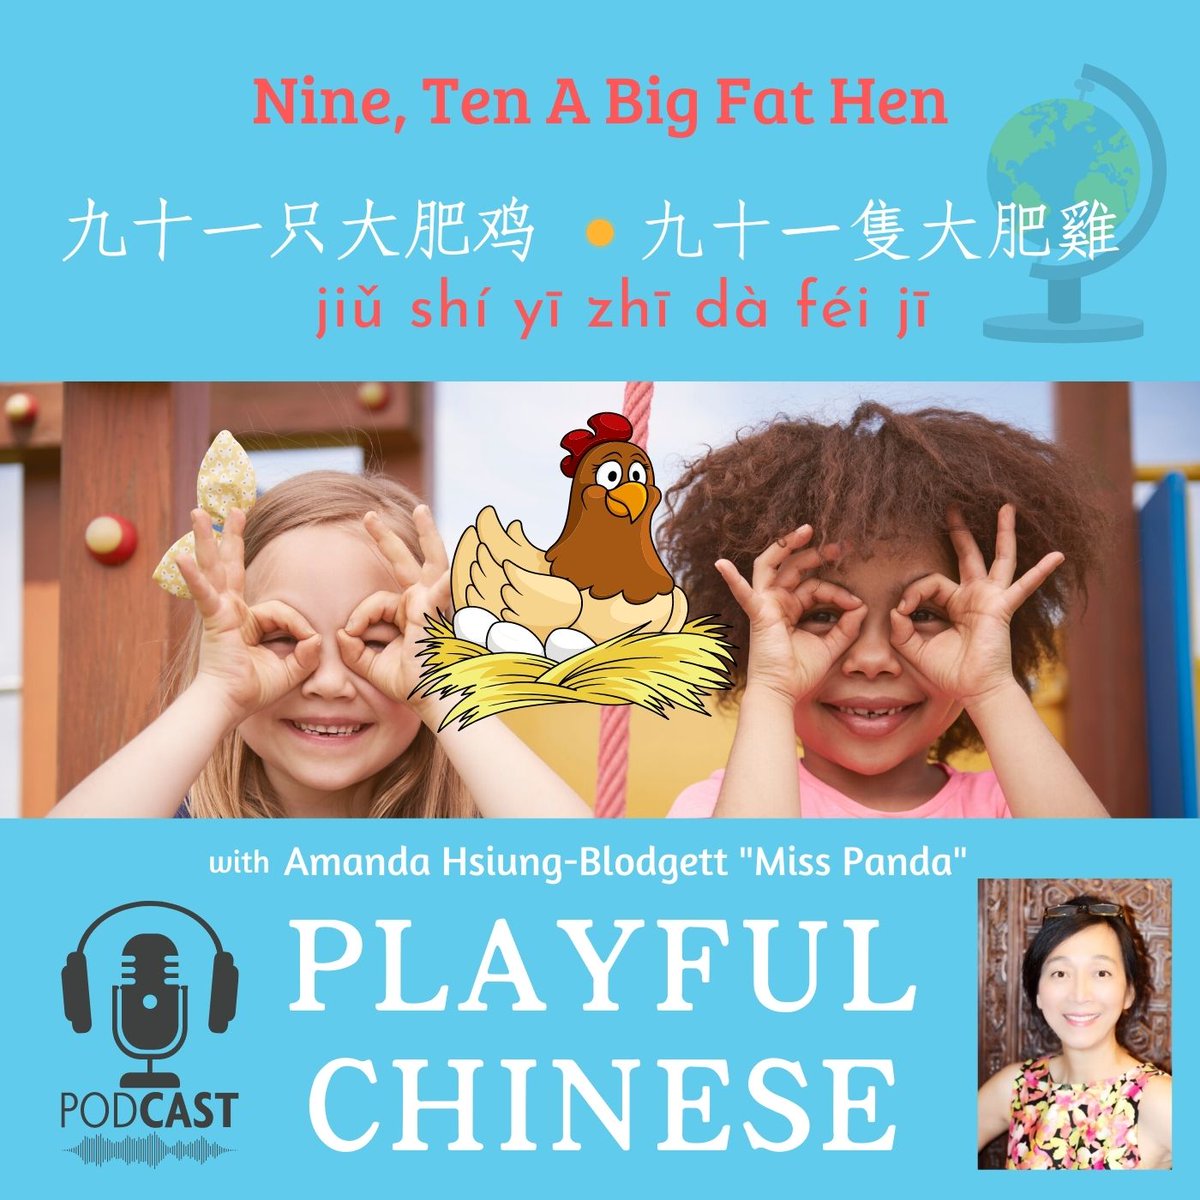 What does it sound like when you chat this Nursery Rhyme in Chinese? Listen and have fun together with 'Nine, Ten A Big Fat Hen' in Chinese! Take a listen here - podcasts.apple.com/us/podcast/nur… #playfulchinesepodcast #misspandachinese #kidslearnchinese